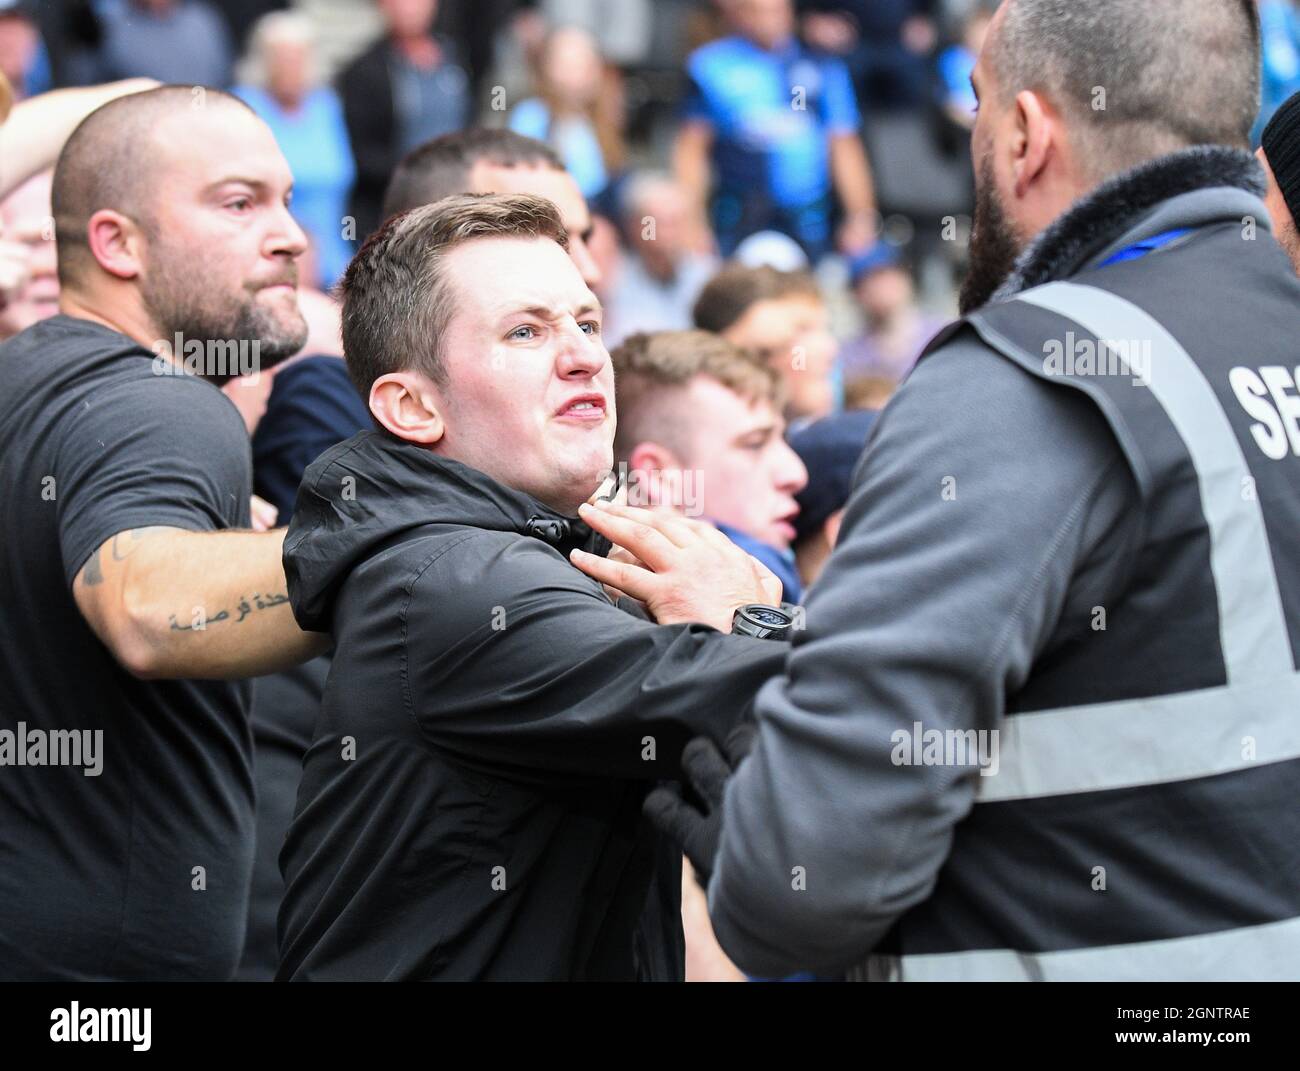 MILTON KEYNES, ENGLAND - SEPTEMBER 25, 2021: Wycombe fans react after Dons' goal during the 2021/22 SkyBet EFL League One matchweek 9 game between MK Dons FC and Wycombe Wanderers FC at Stadium MK. Copyright: Cosmin Iftode/Picstaff Stock Photo